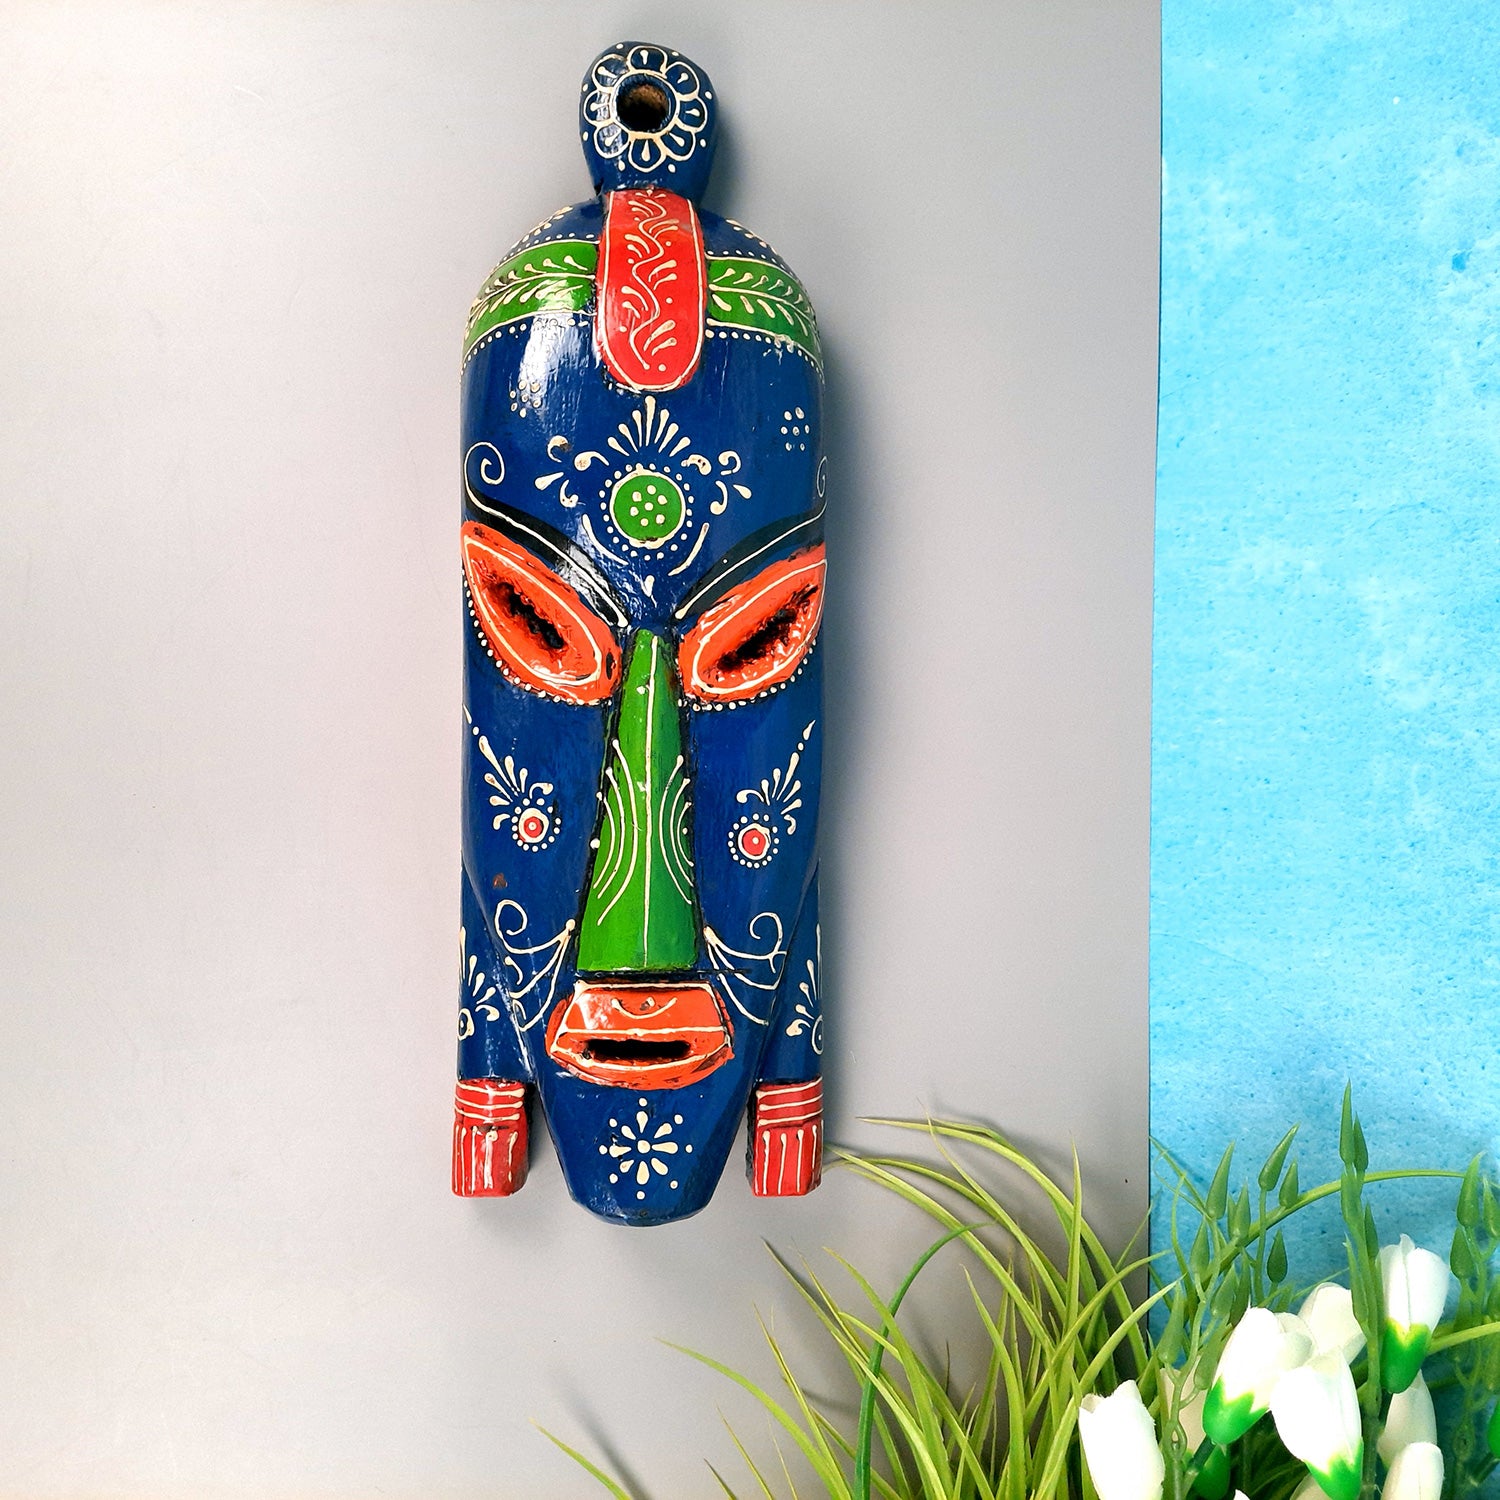 Nazar Battu Wall Mask | Tribal Face Masks Hanging |Long African Egyptian Wooden Faces Hangings - for Home Entrance, Living Room, Door Decor, Hall-Way, Balcony Decoration & Gift - 15 Inch - Apkamart